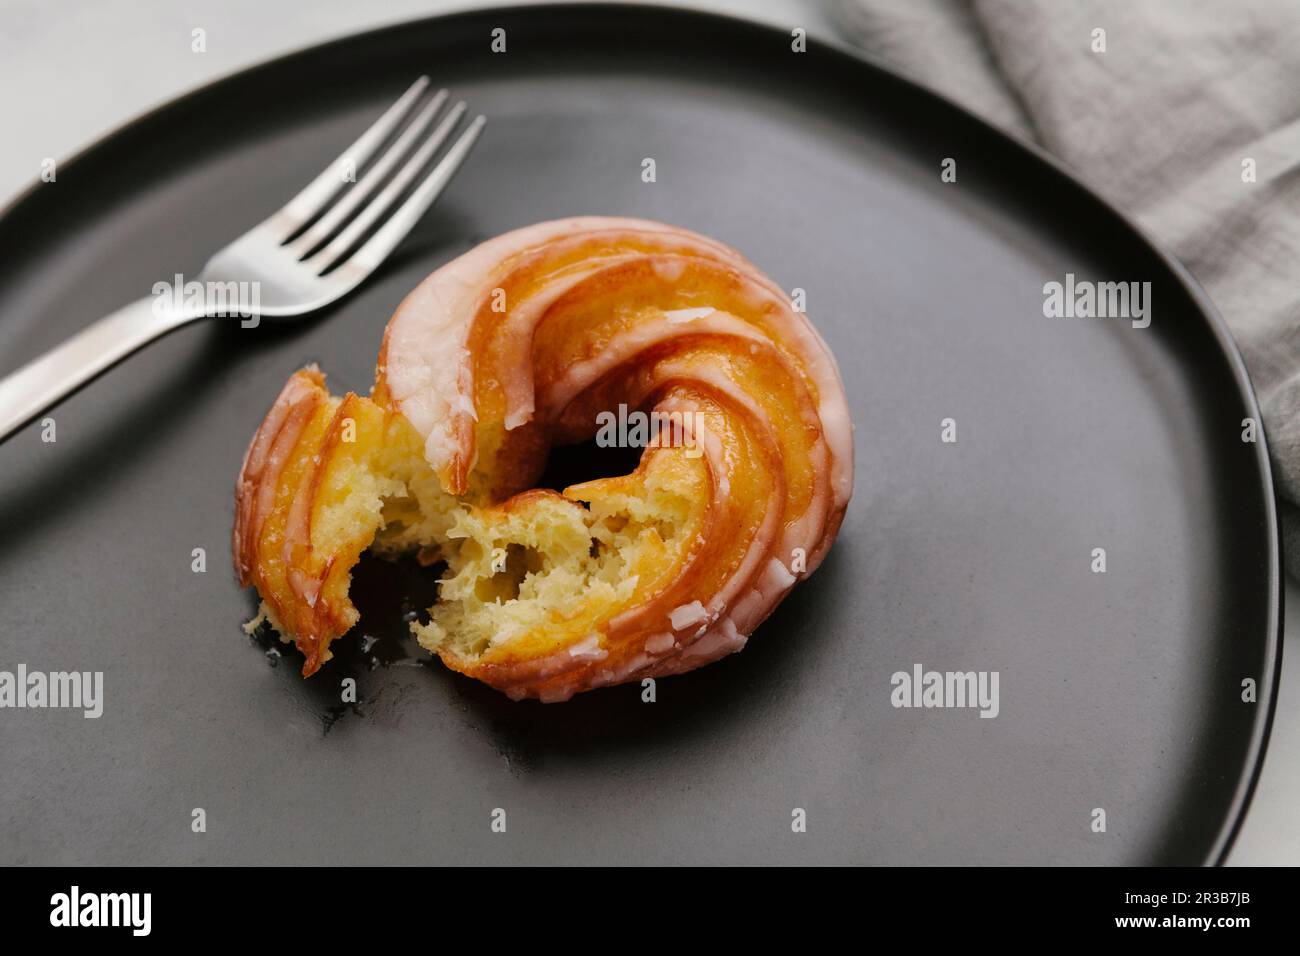 Gourmet French Cruller donut Stock Photo